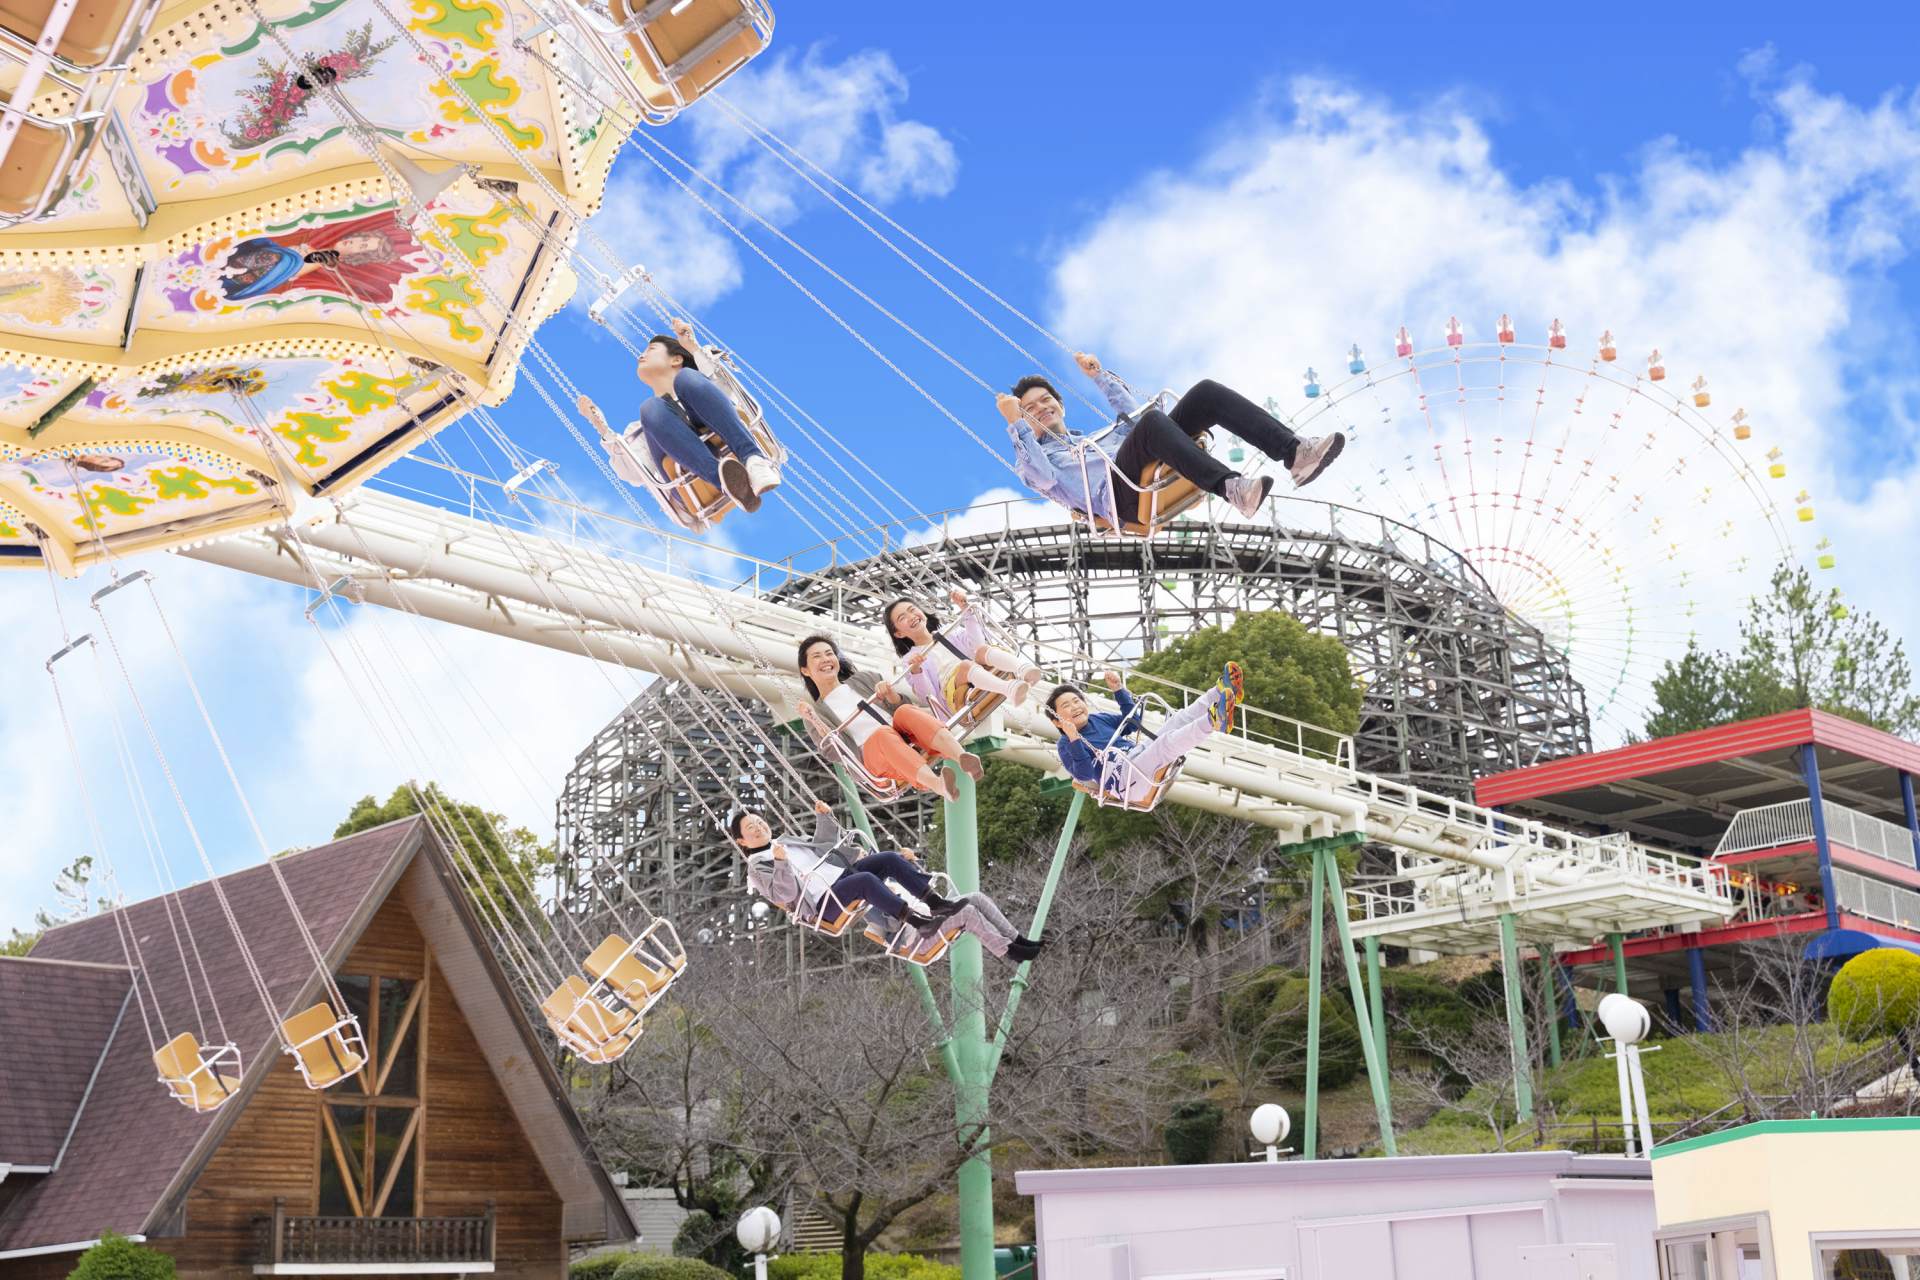 Packed with thrills for all 4 seasons! The long-lived amusement park known by the nickname “Hirapah”